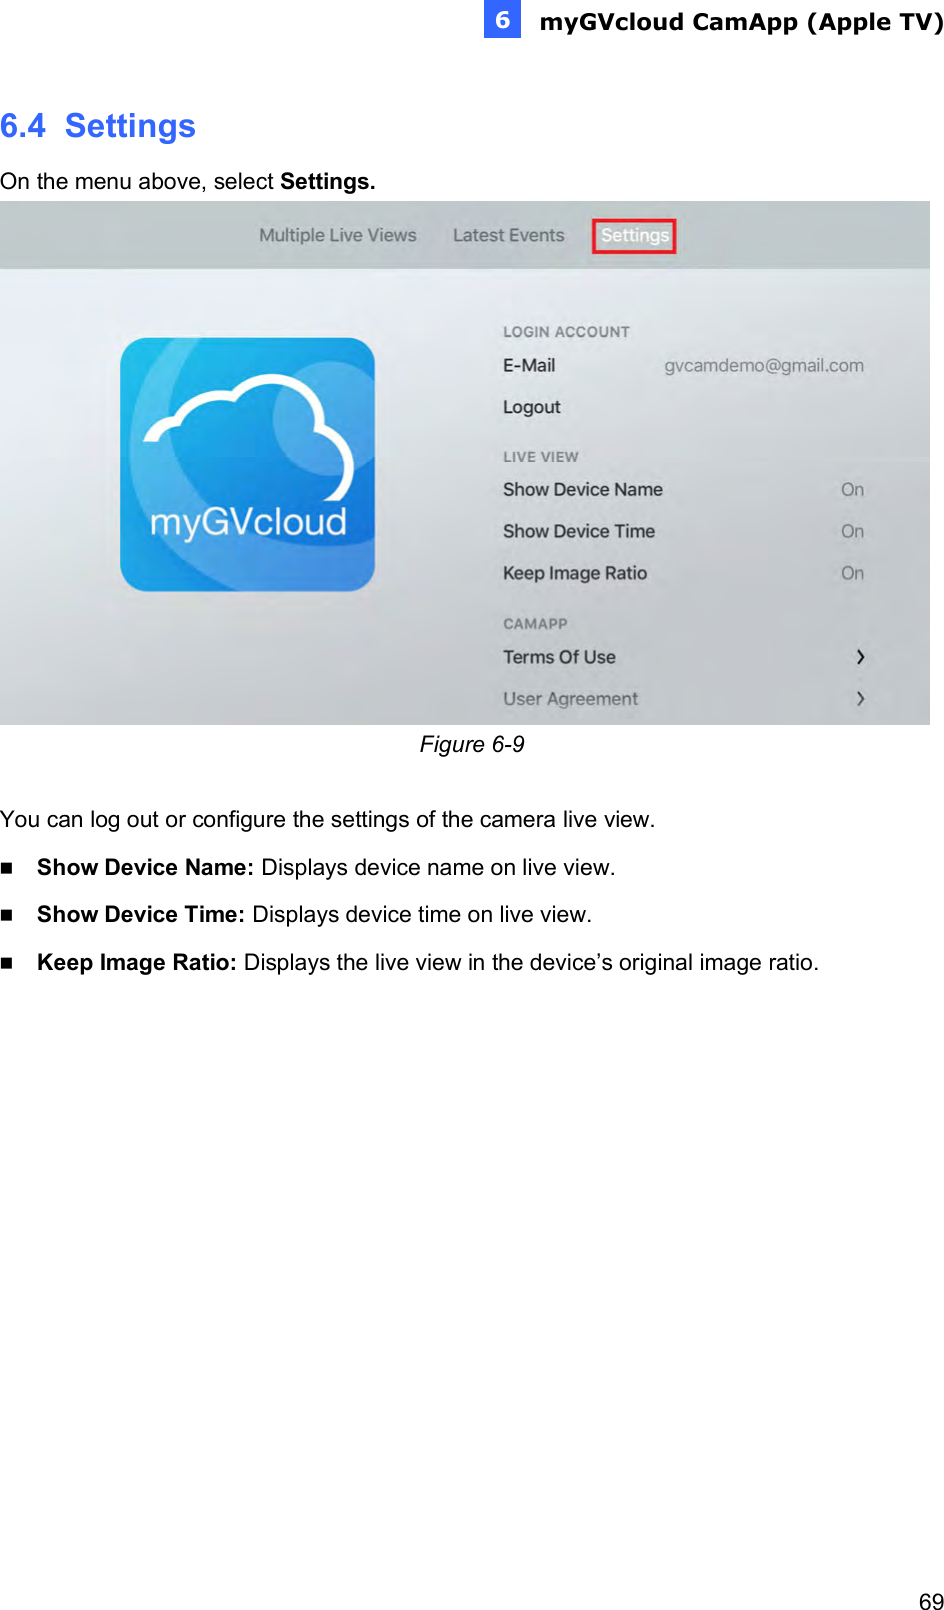  myGVcloud CamApp (Apple TV)     696e 6.4  Settings On the menu above, select Settings.   Figure 6-9  You can log out or configure the settings of the camera live view.   Show Device Name: Displays device name on live view.  Show Device Time: Displays device time on live view.  Keep Image Ratio: Displays the live view in the device’s original image ratio. 